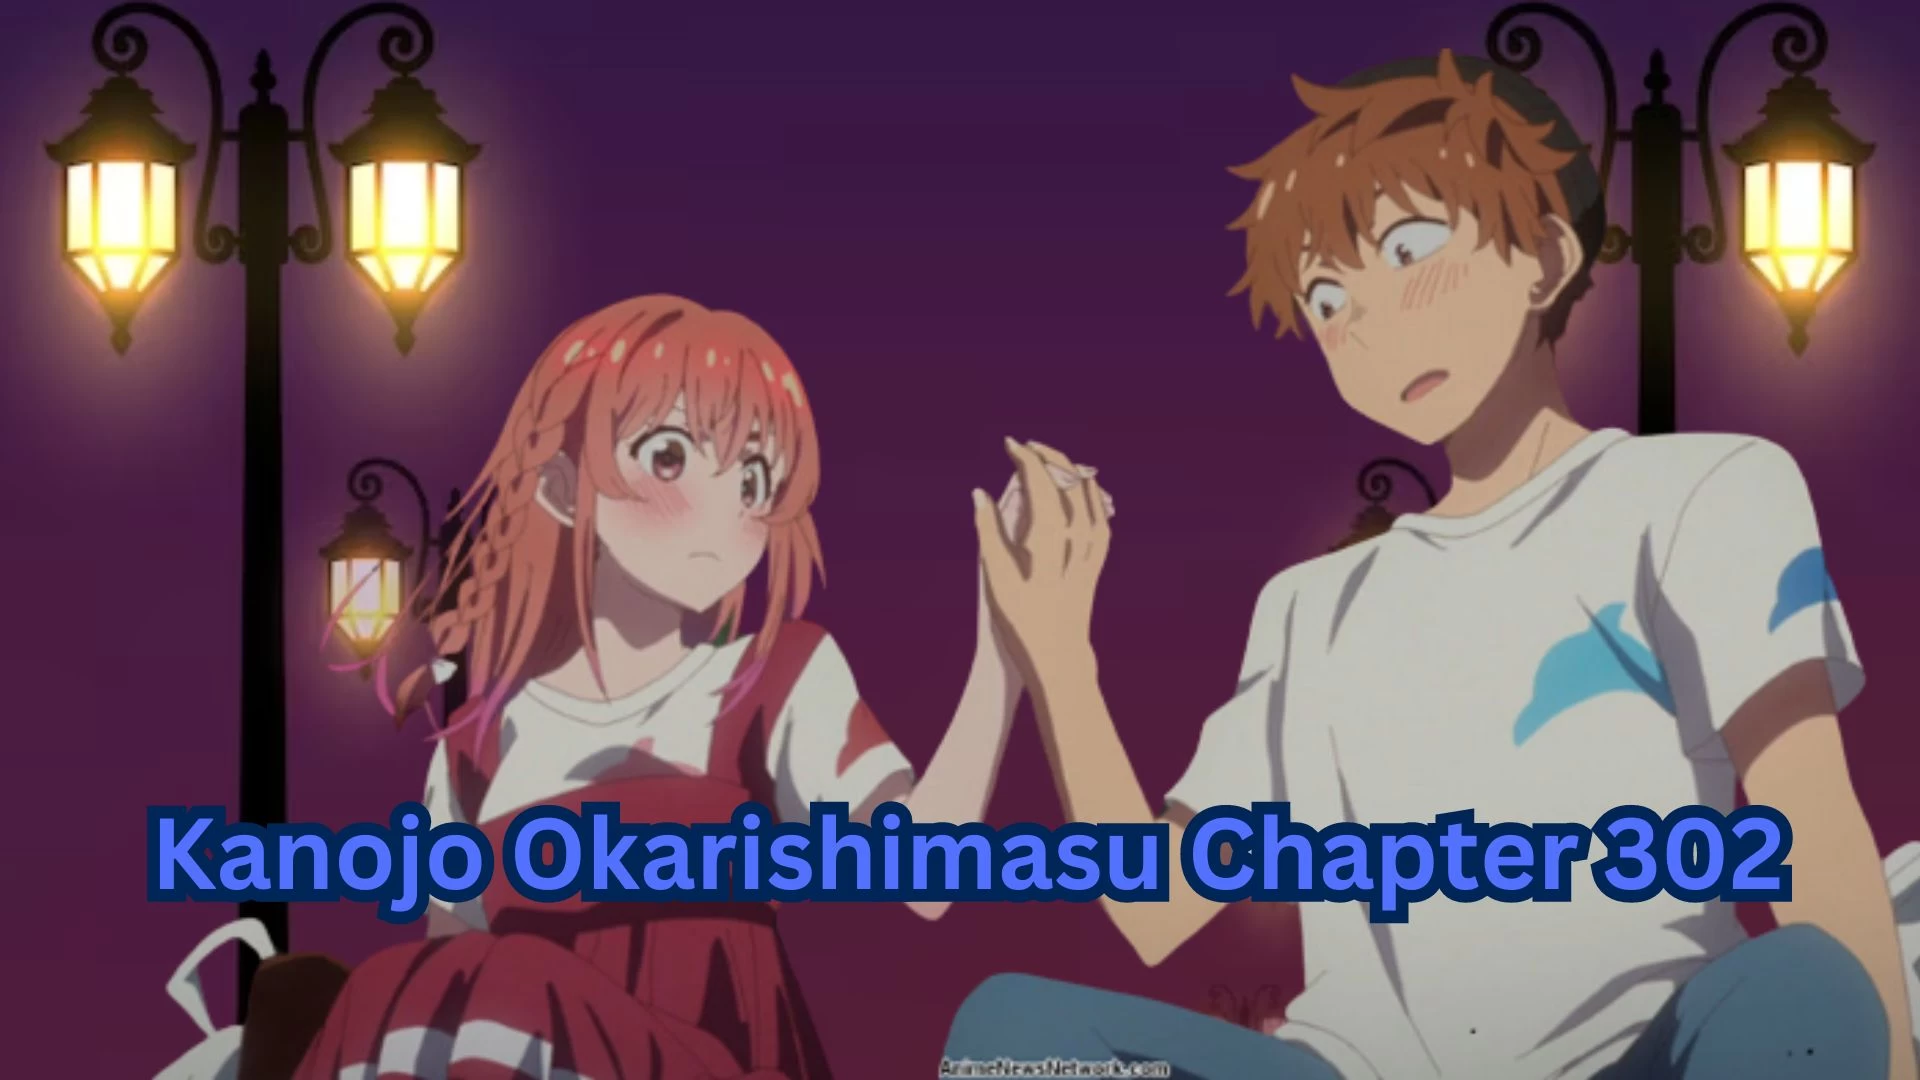 Kanojo Okarishimasu Chapter 302 Spoilers, Release Date, Raw Scan, Where to Read and More